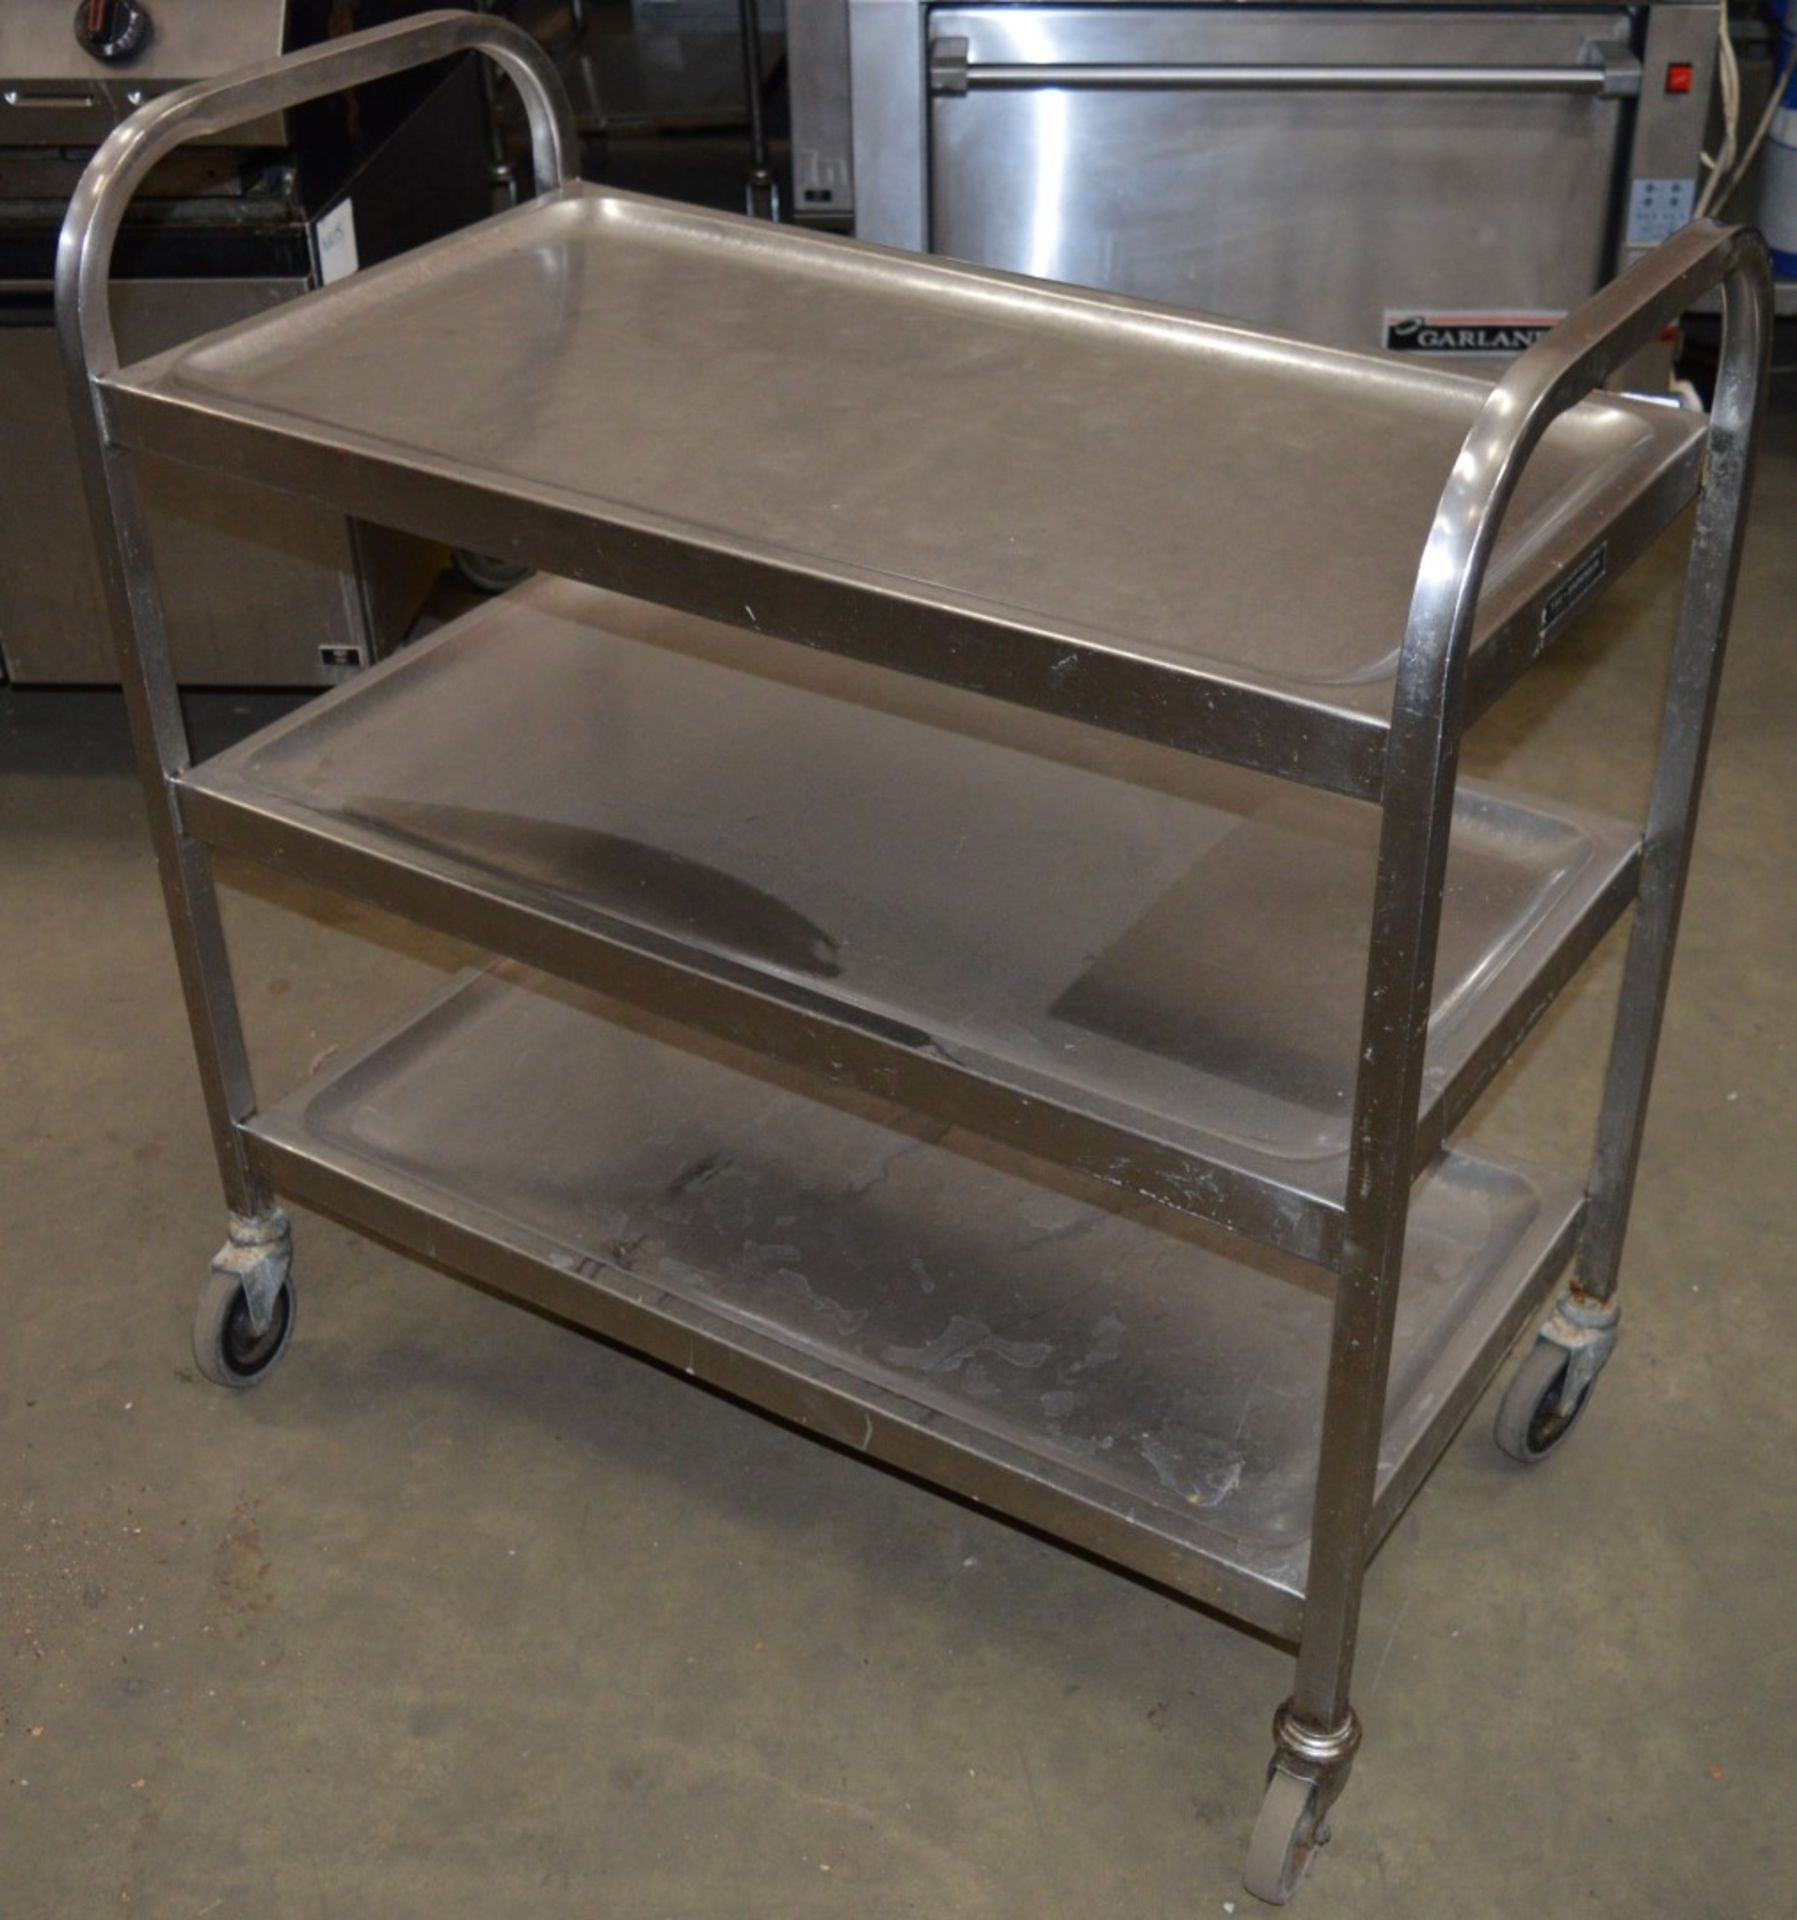 1 x Stainless Steel 3 Tier Spill Resistant Trolley on Castors - Commercial Catering Equipment -